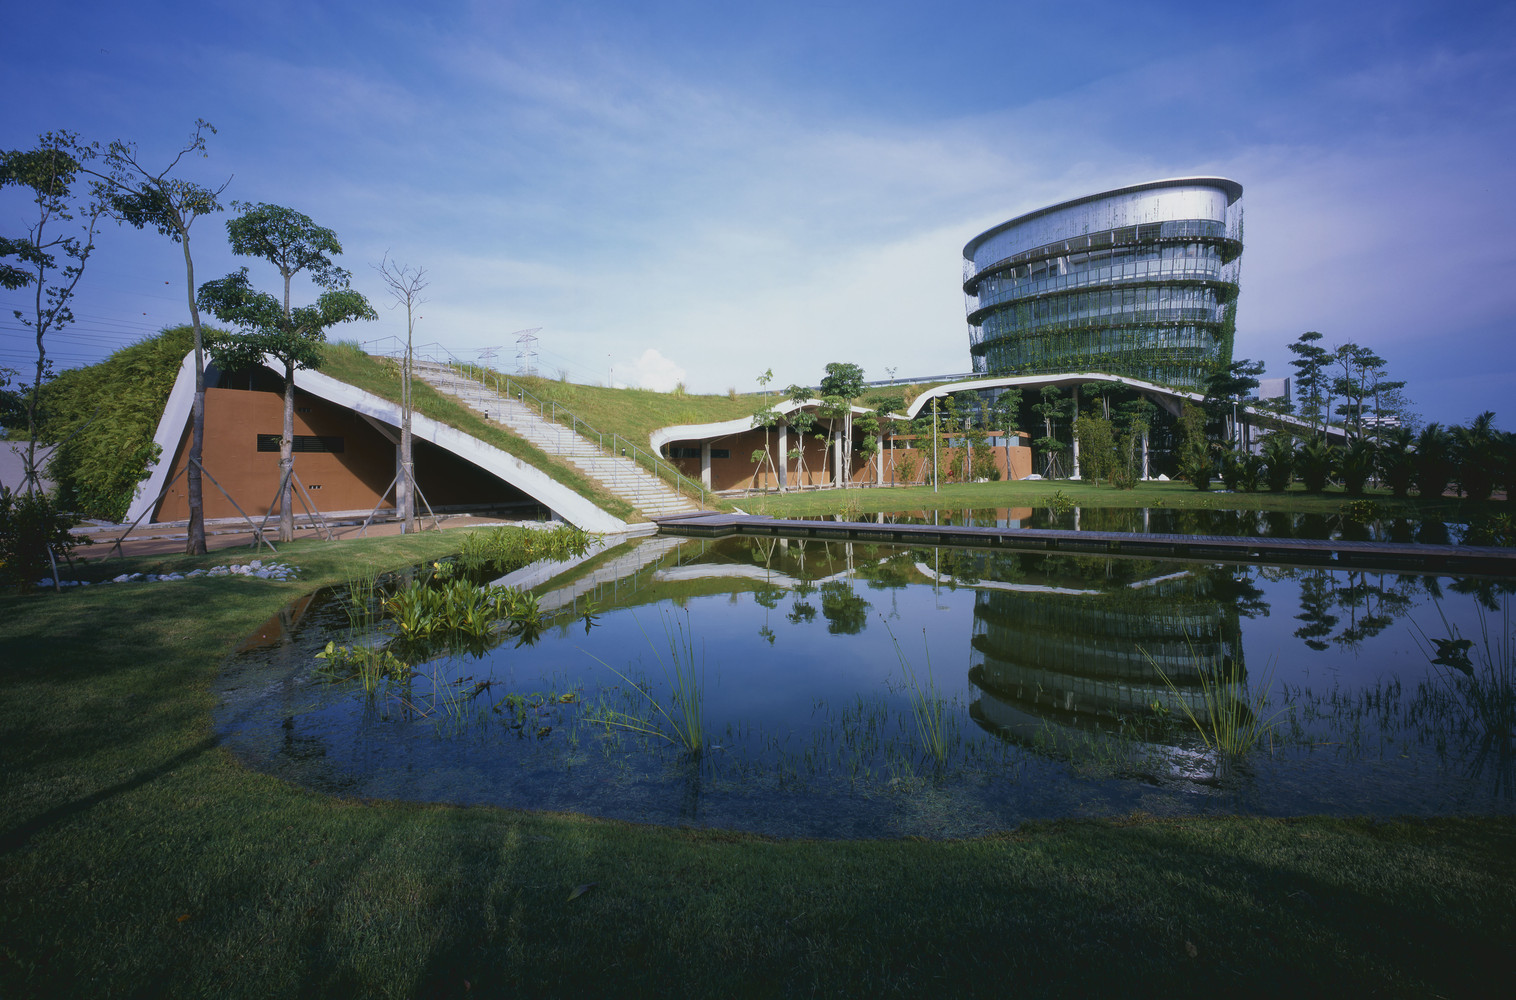 World's best industrial architecture for 2016: Factory in the Earth, Johor - ExpatGo